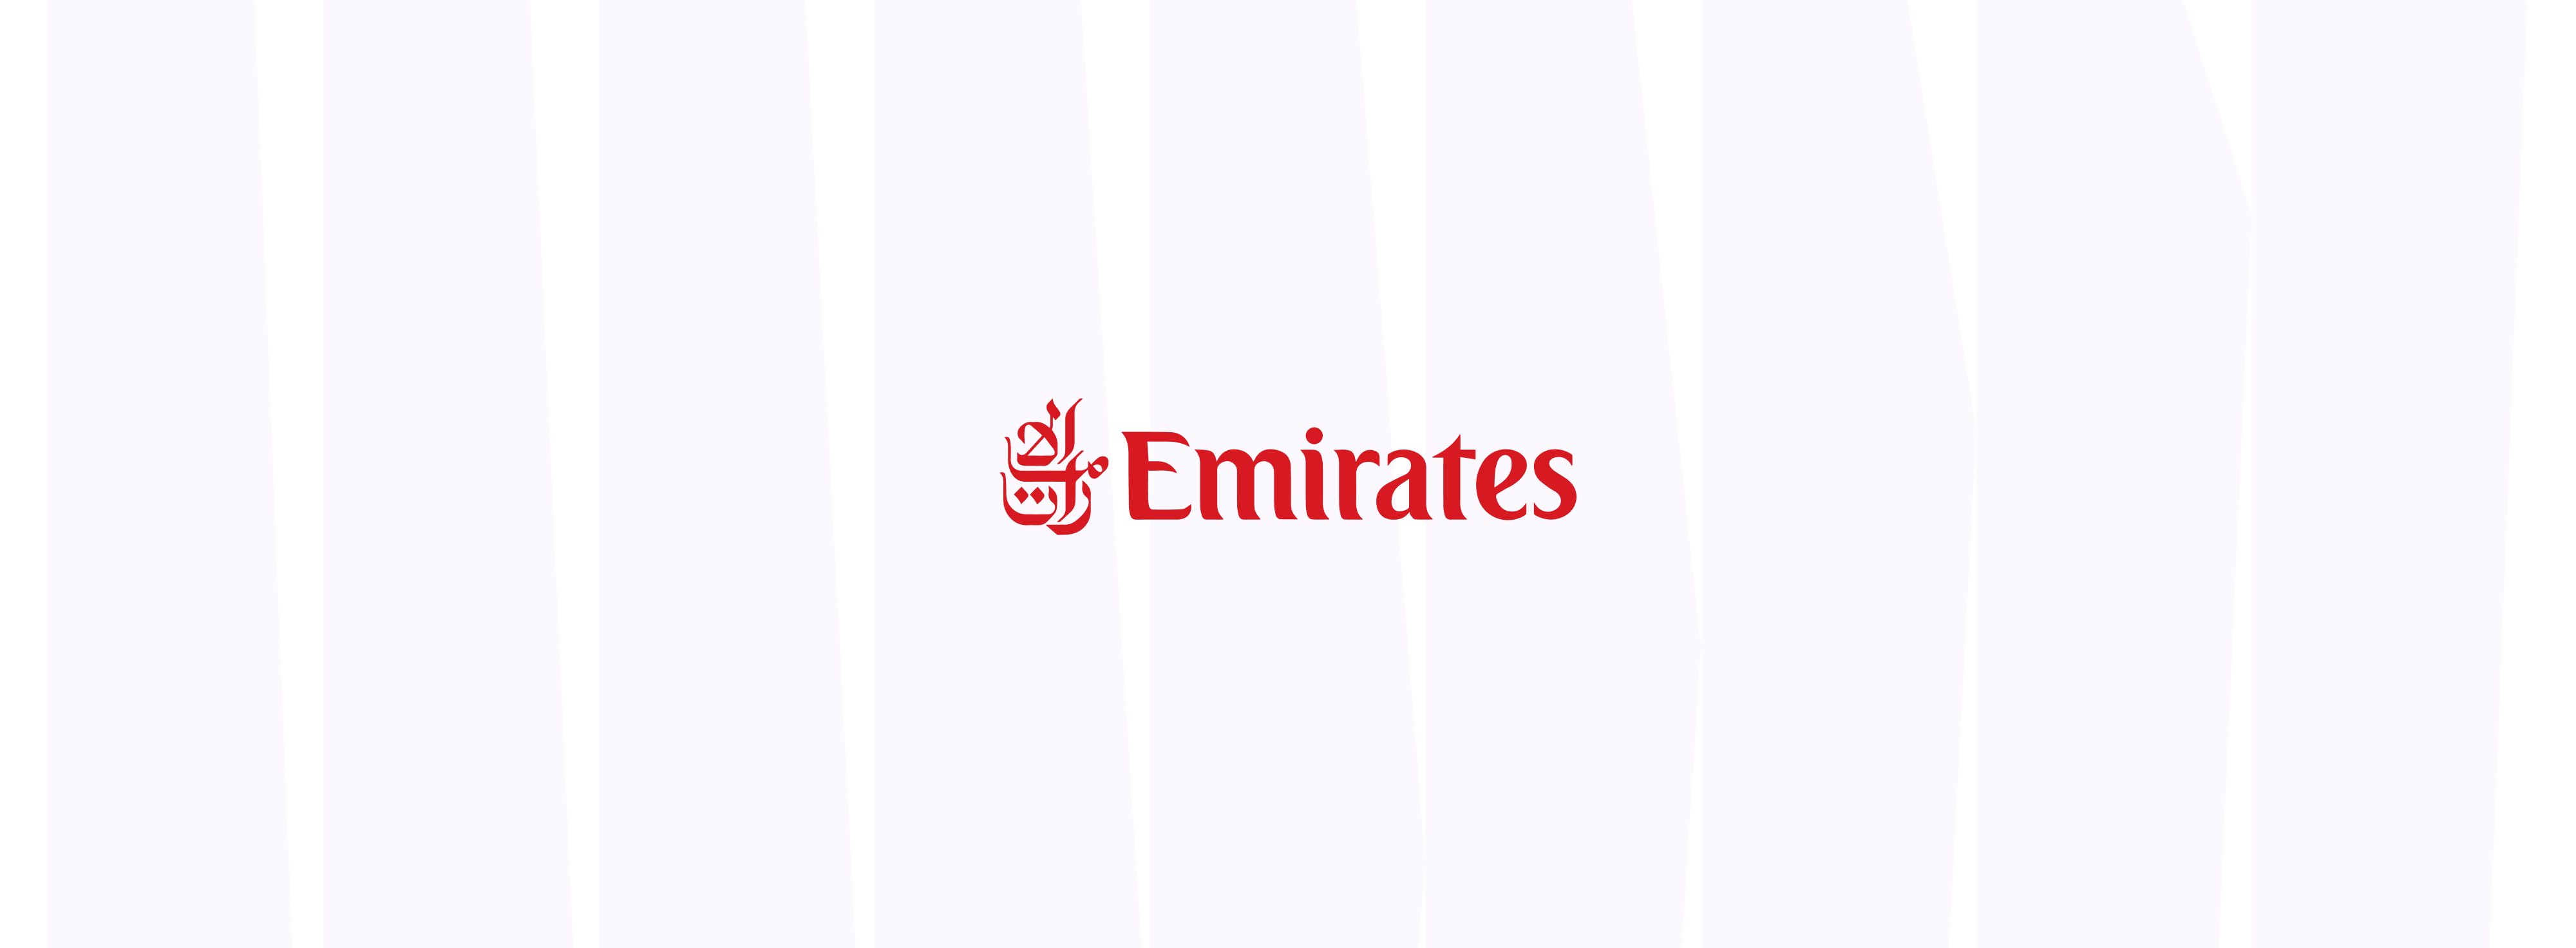 Termination of Emirates' participation in the Sabre GDS